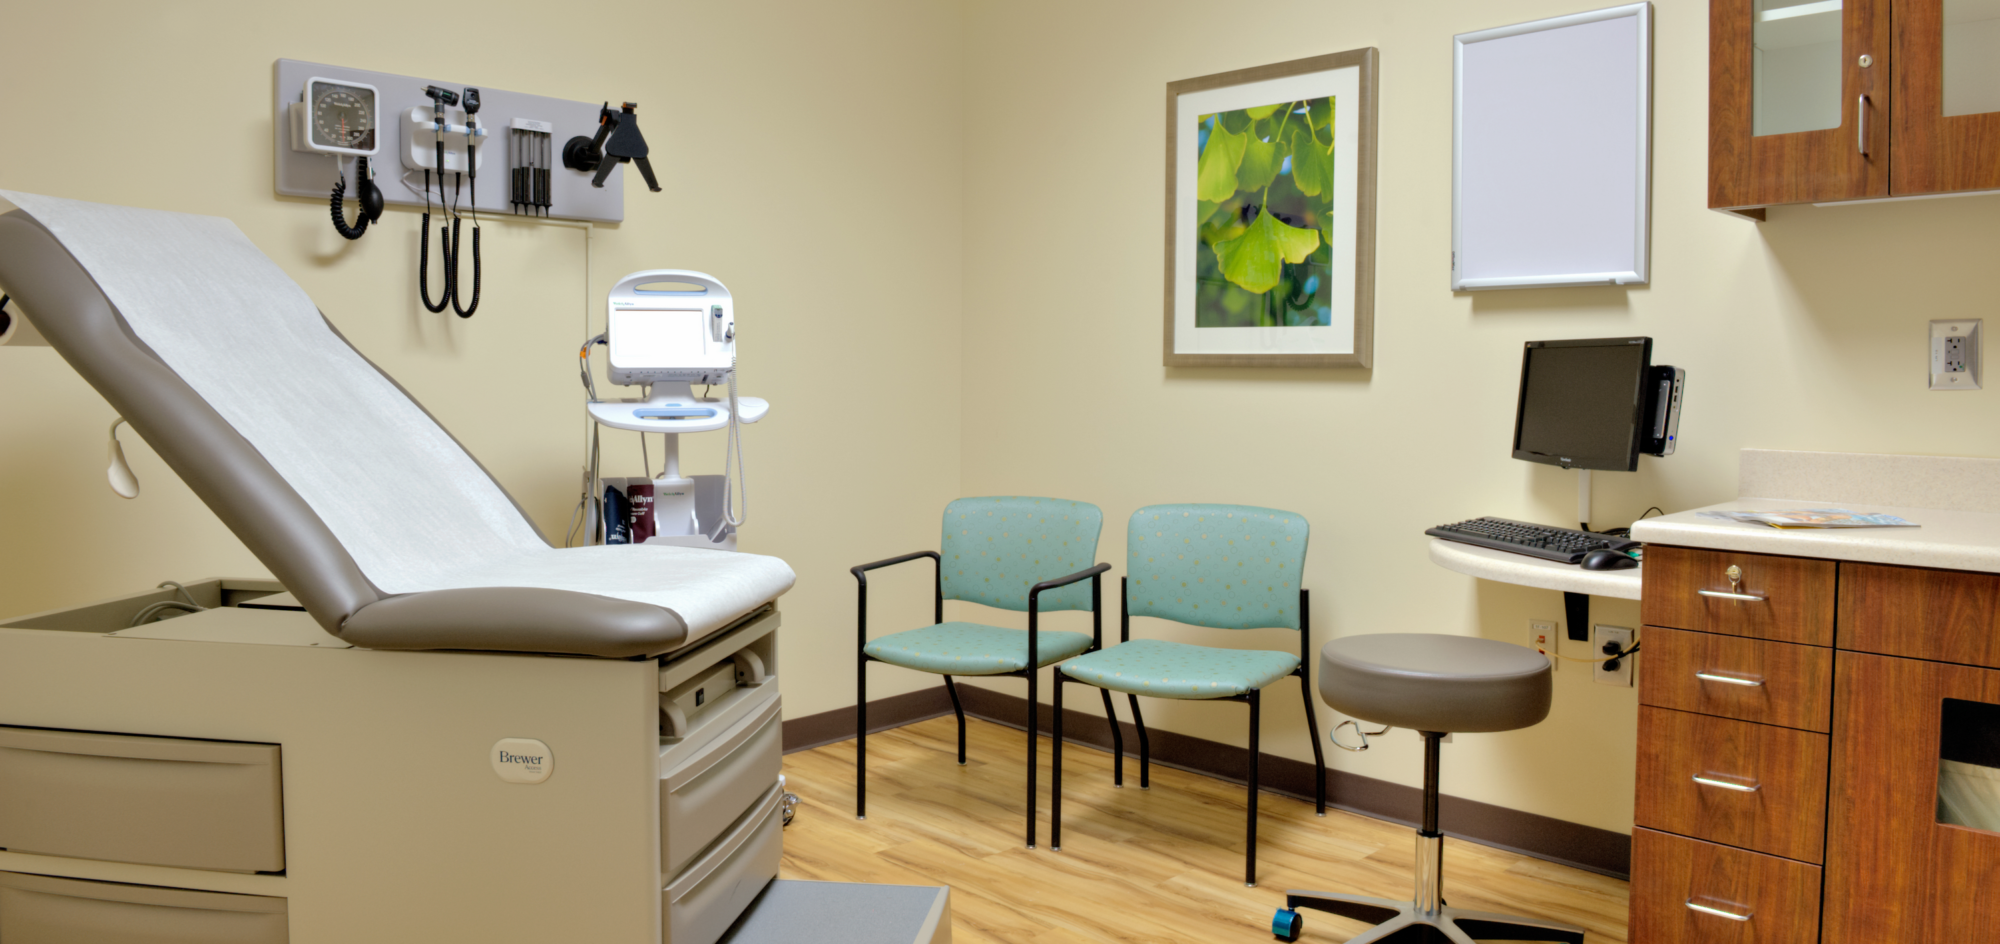 A Complete List Of Medical Equipment Must Haves For Your New Exam Room